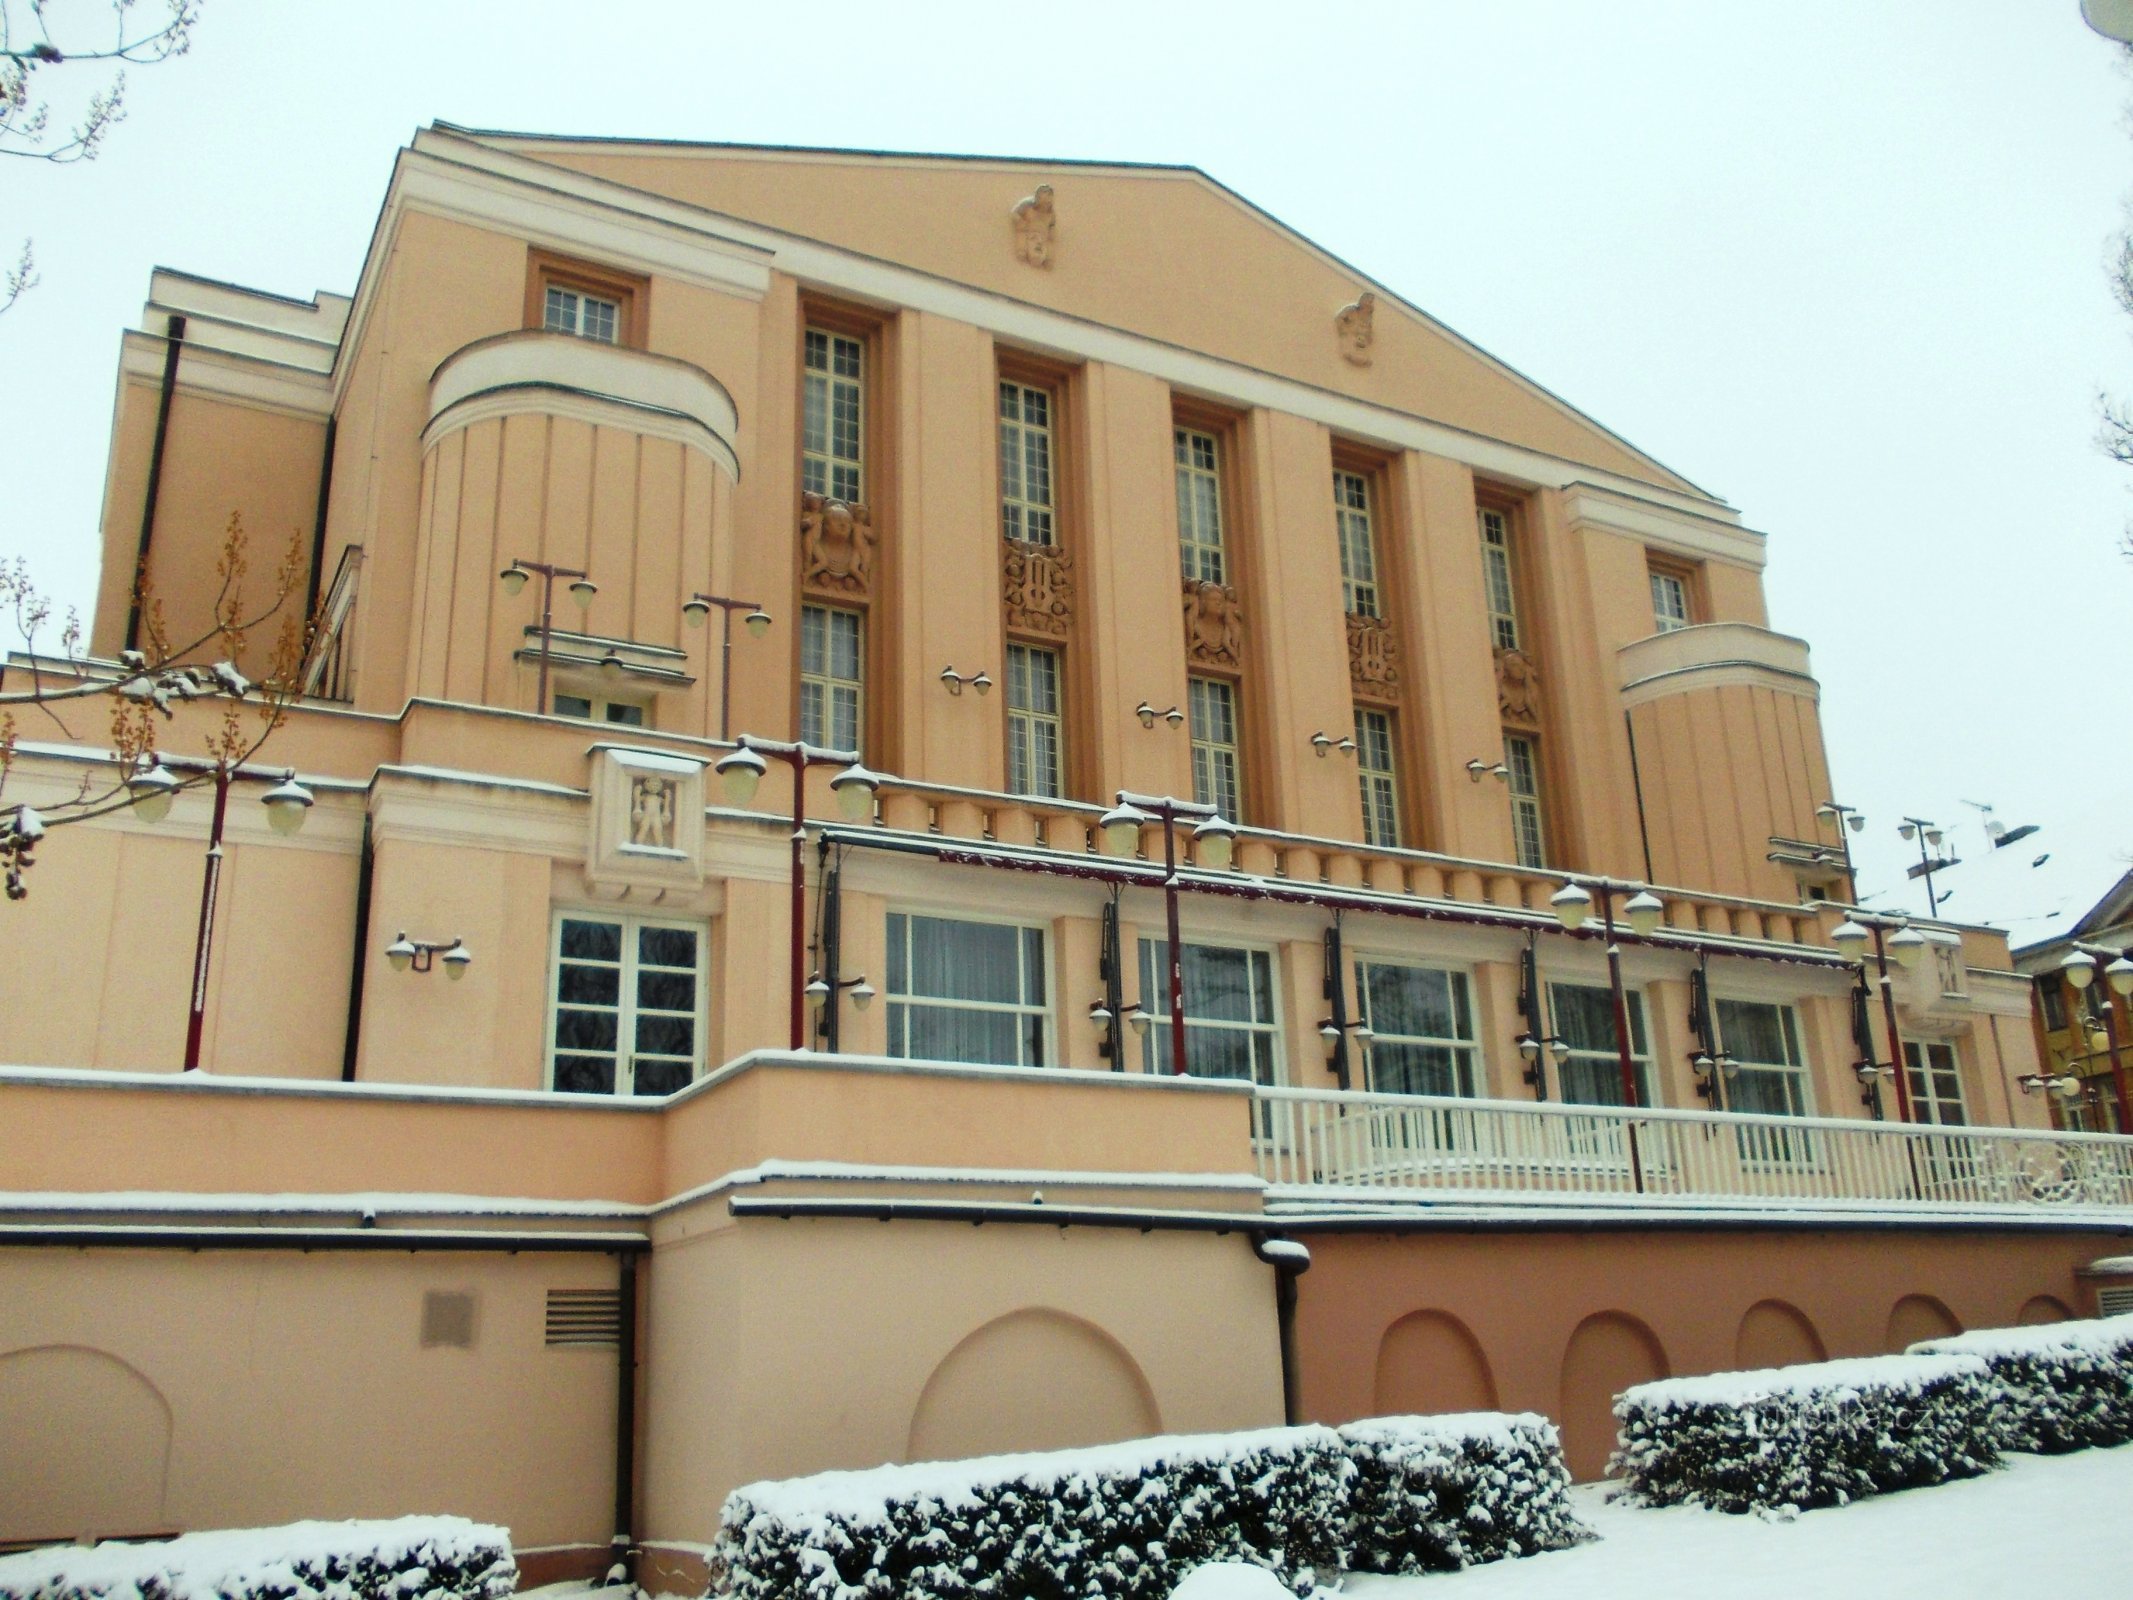 the eastern part of the theater building